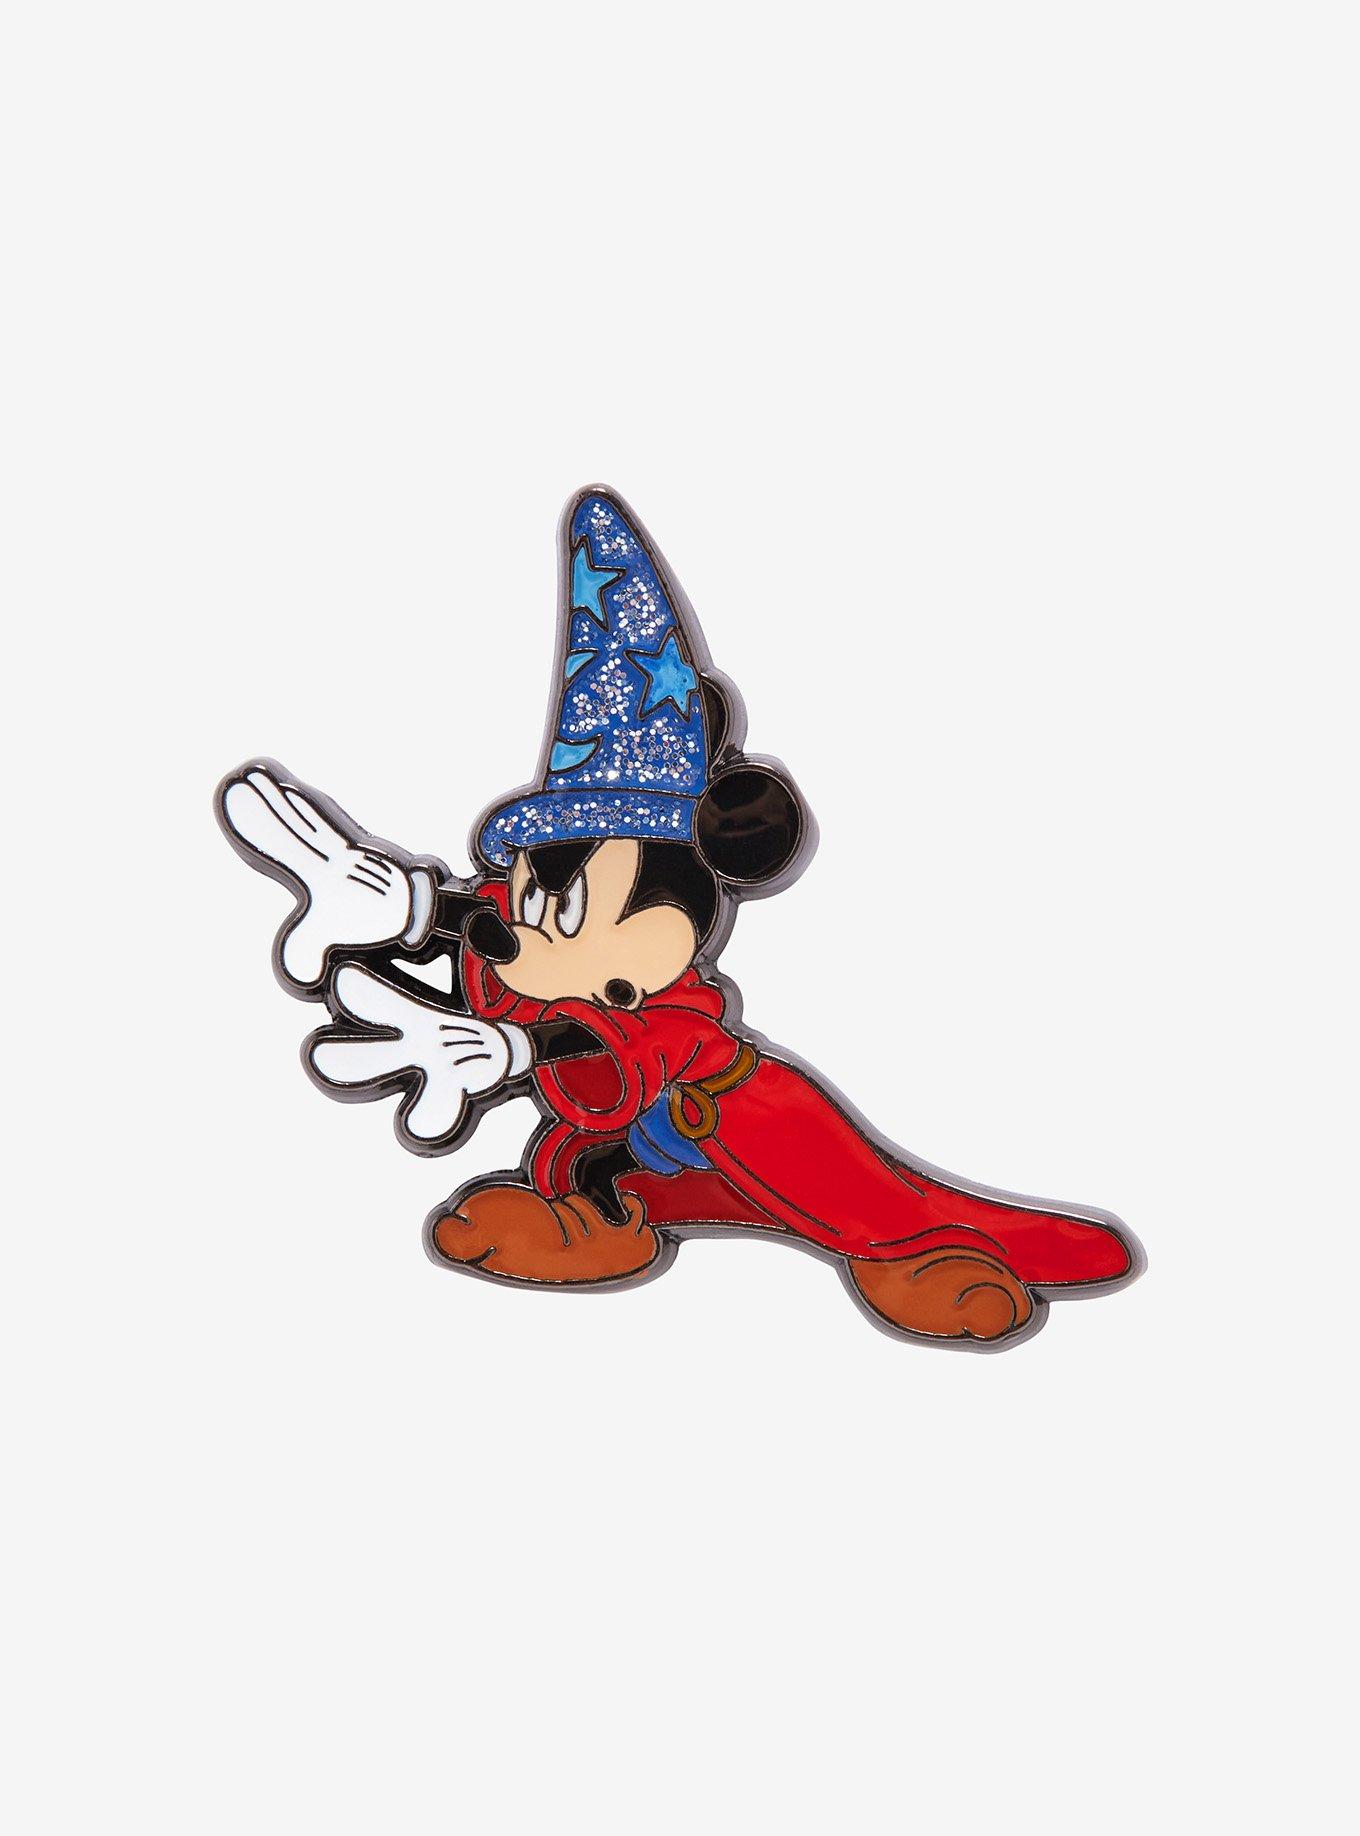 Sorcerer Apprentice Mickey Mouse Pin Trading Book Bag For Disney Pin  Collections